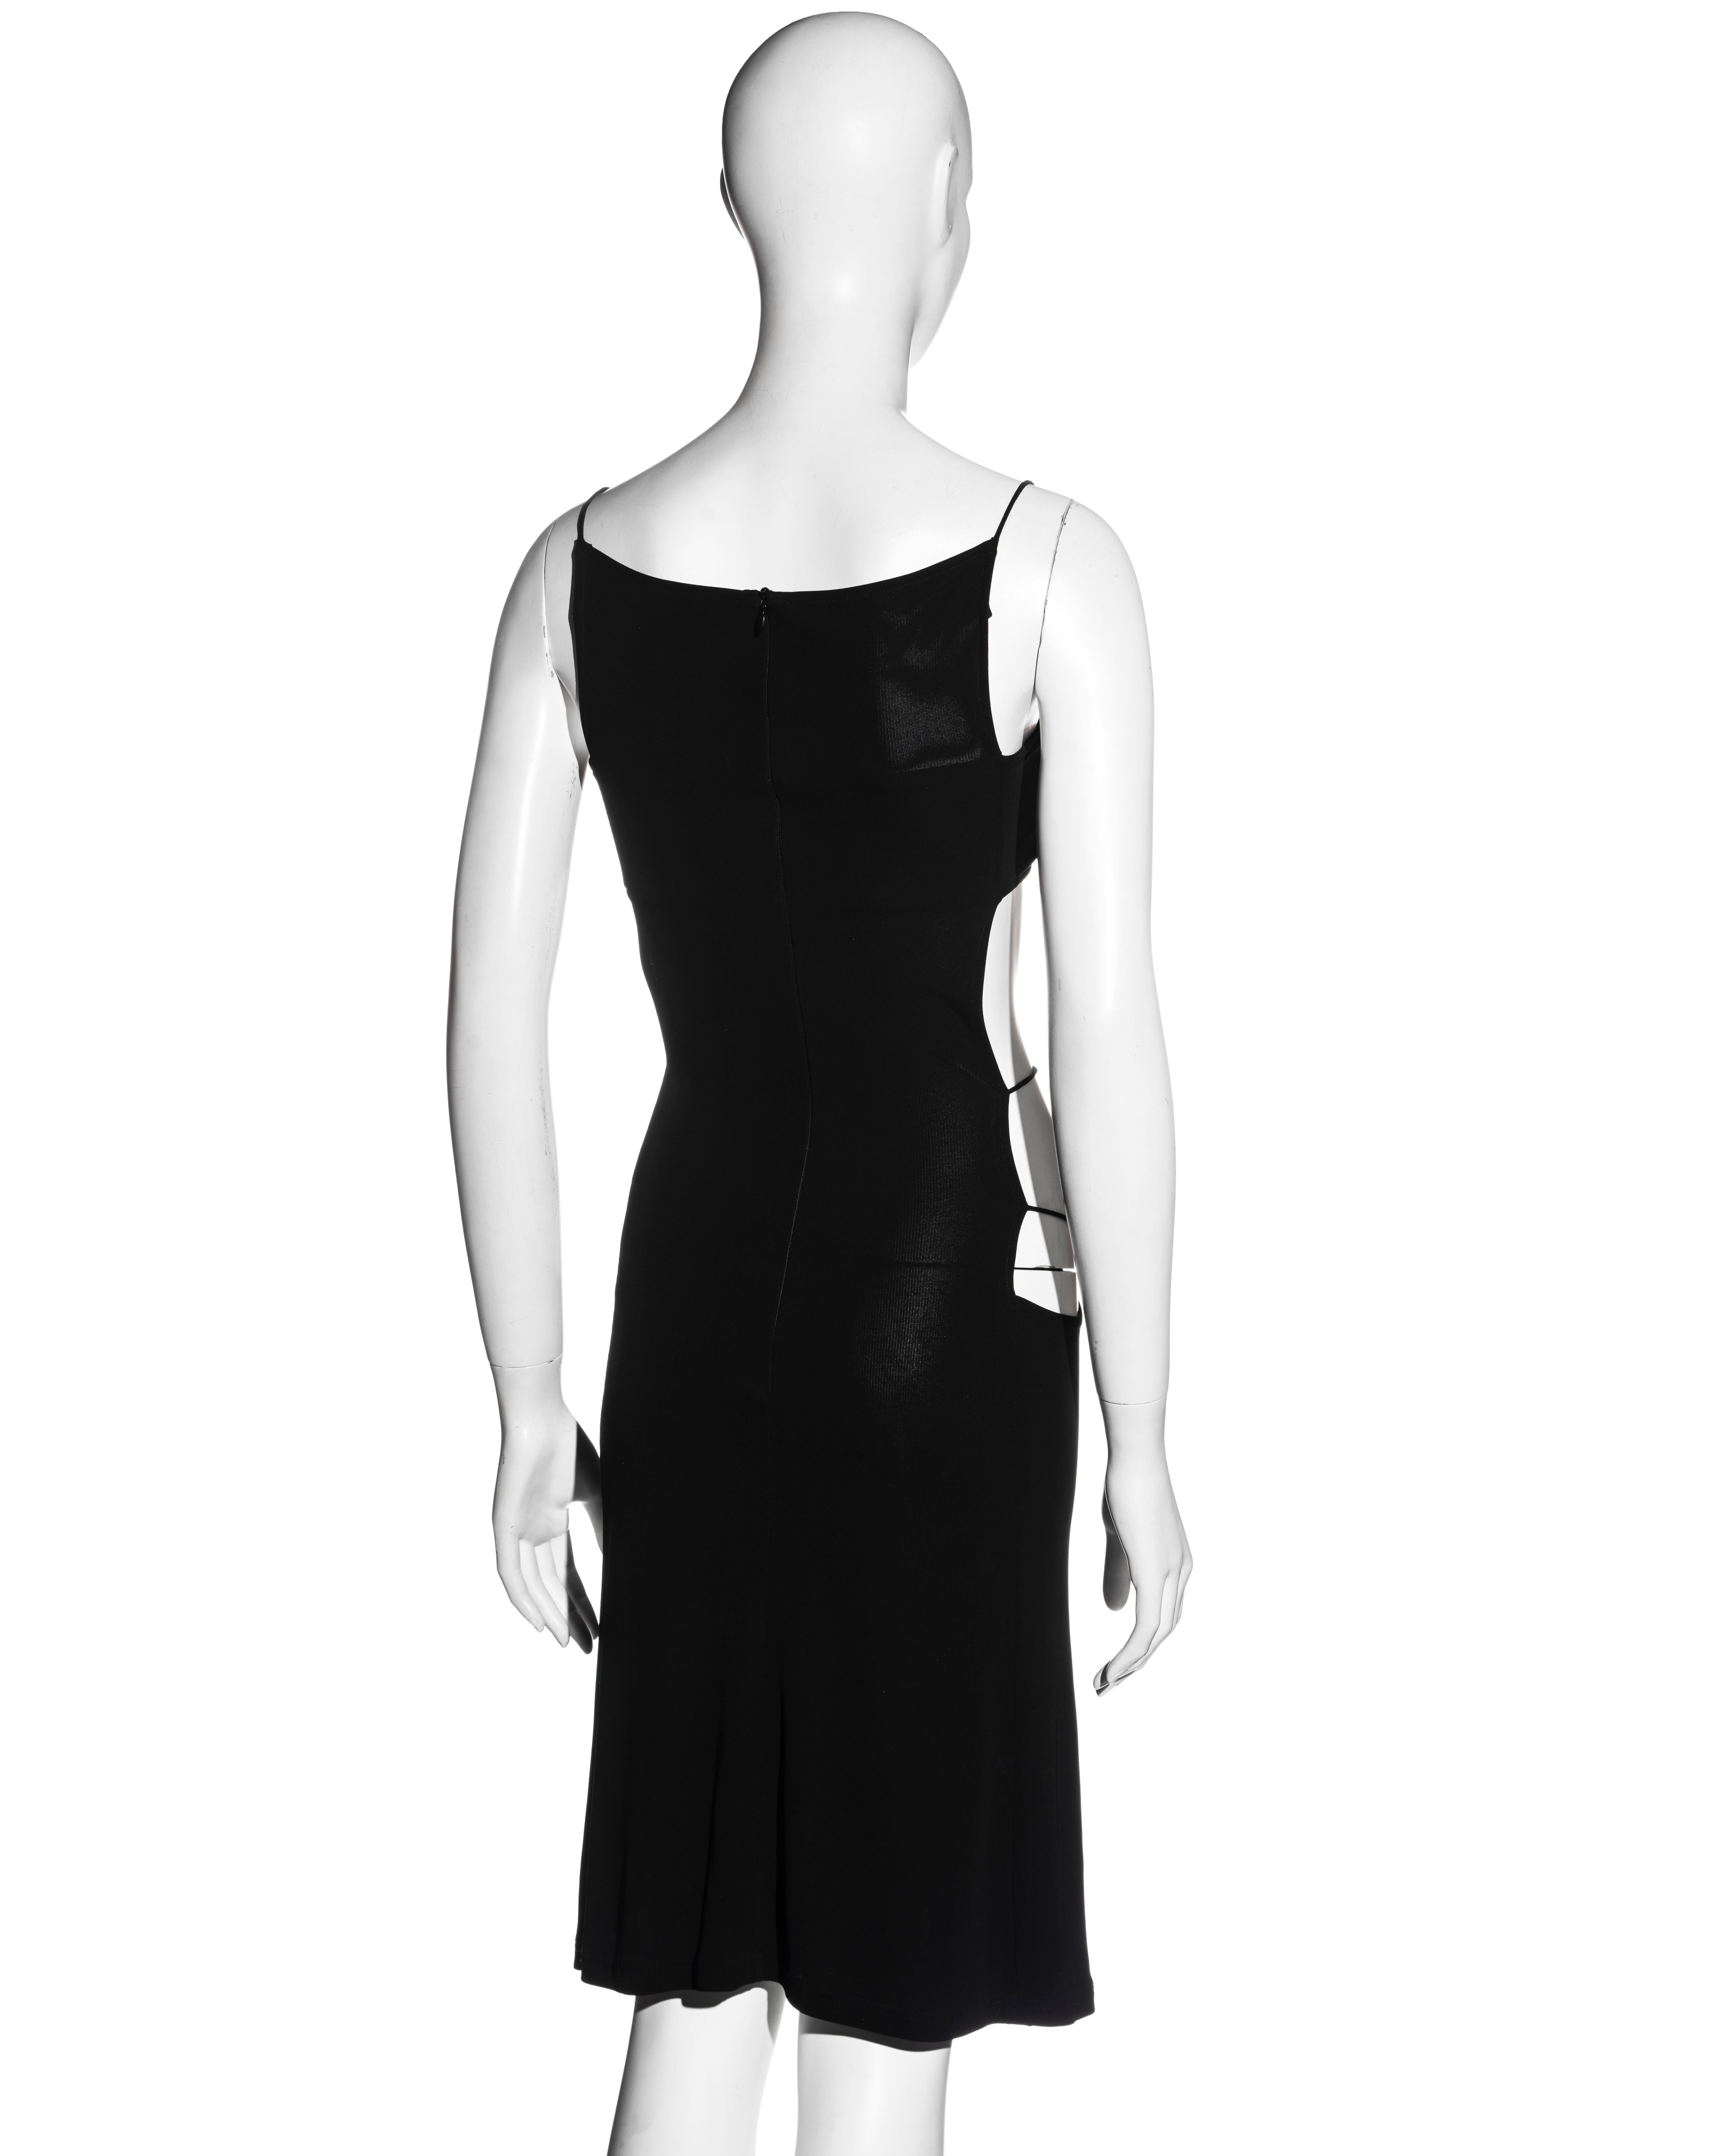 Paco Rabanne black rayon strappy evening dress with square mirror plate, ss 2004 1